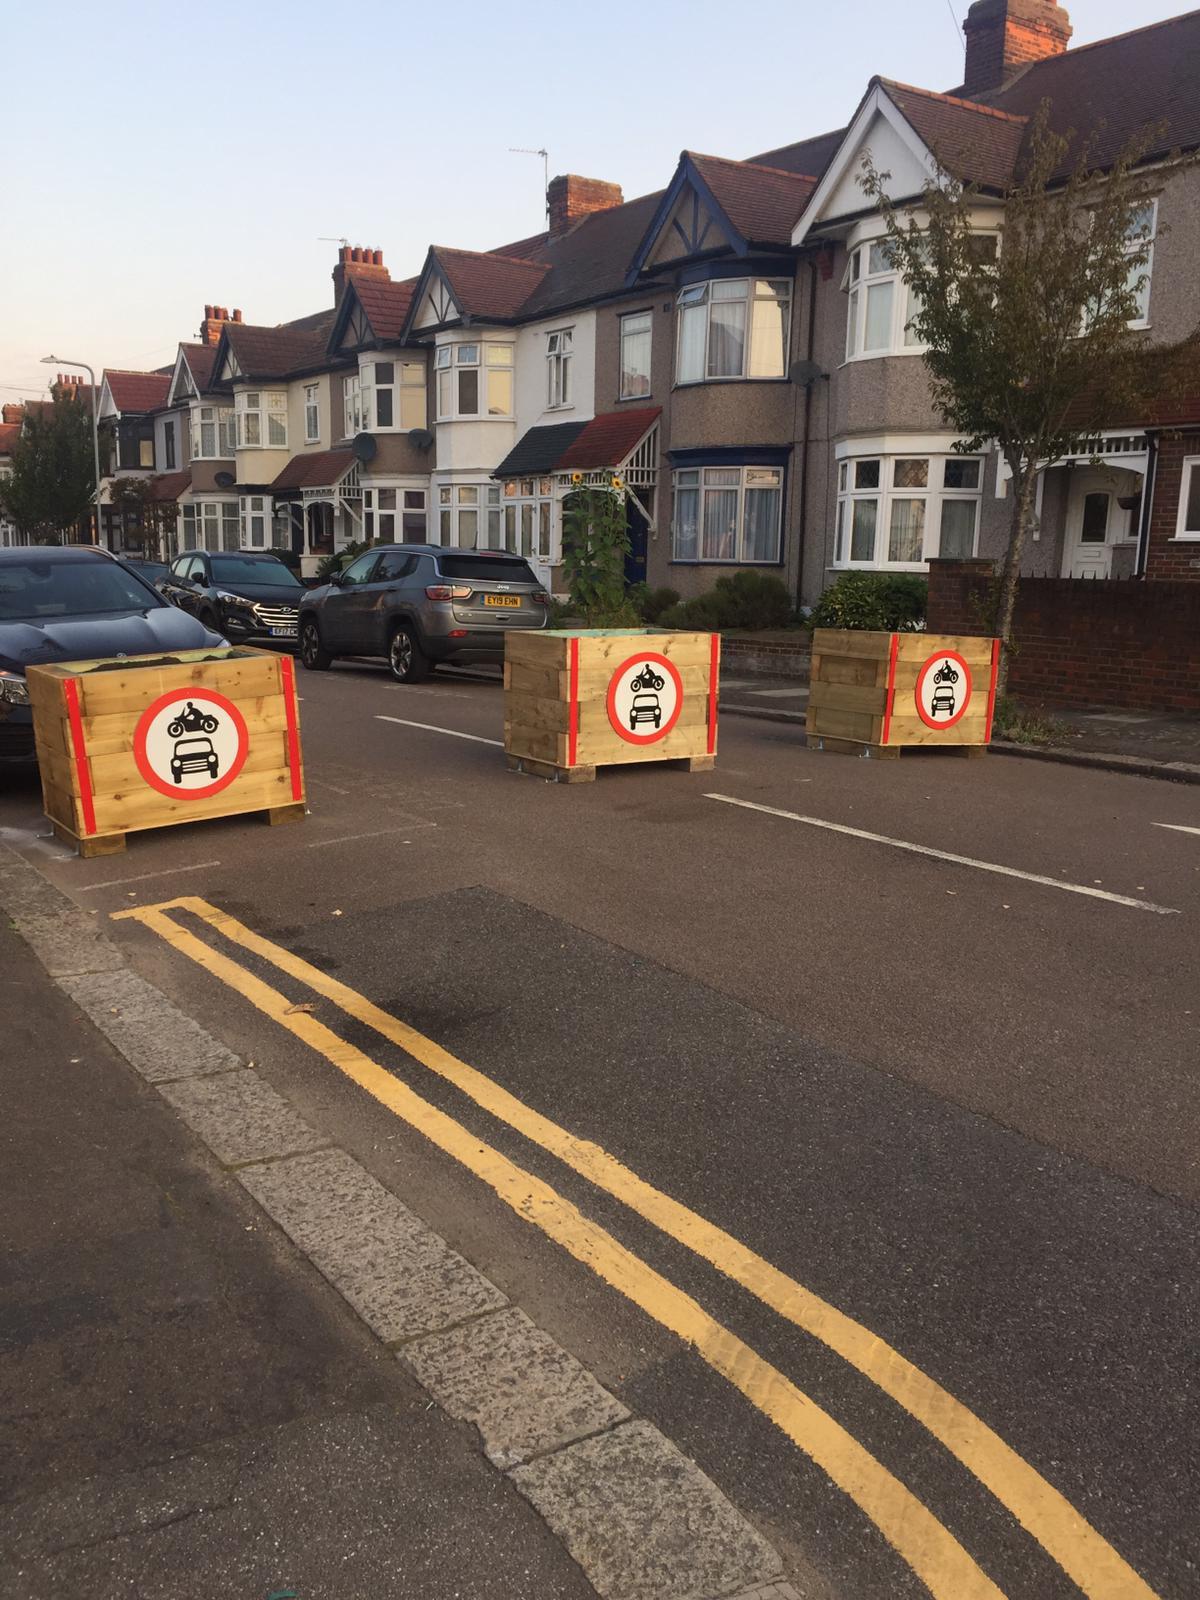 Temporary barriers installed as part of the Barkingside South Quiet Streets trial (Photo: Andy Campbell)